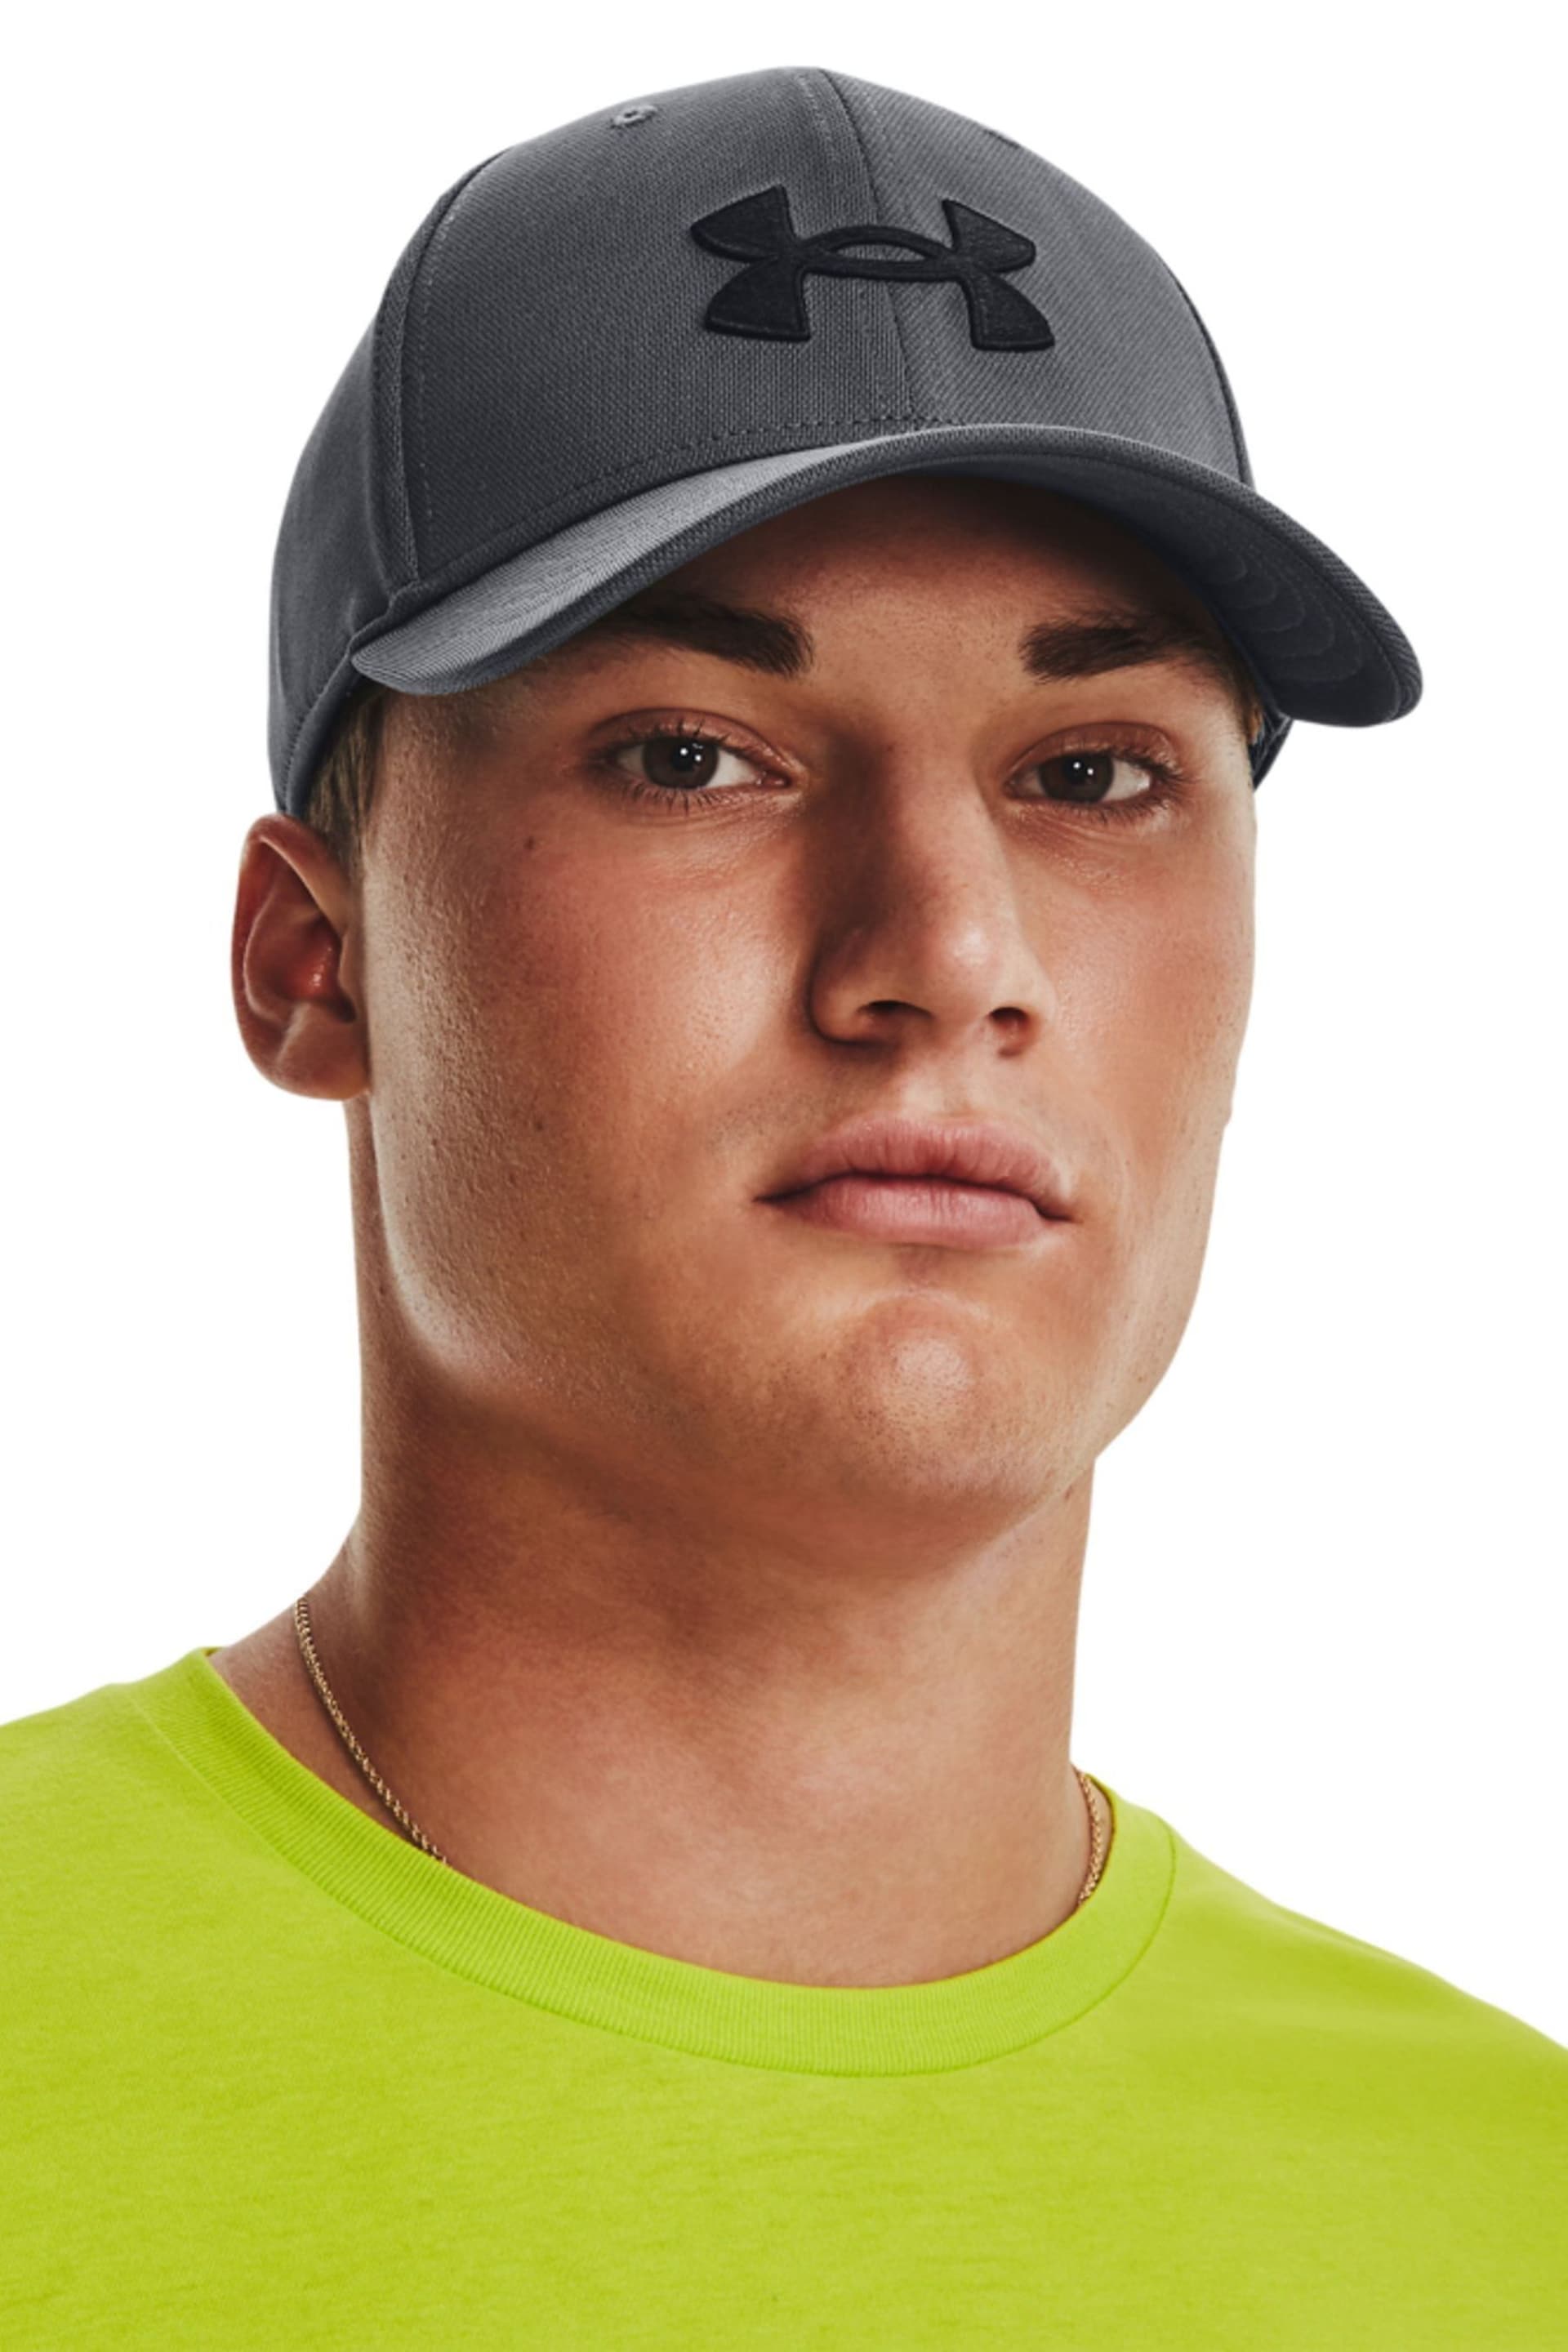 Under Armour Grey Blitzing Adjustable Cap - Image 3 of 3